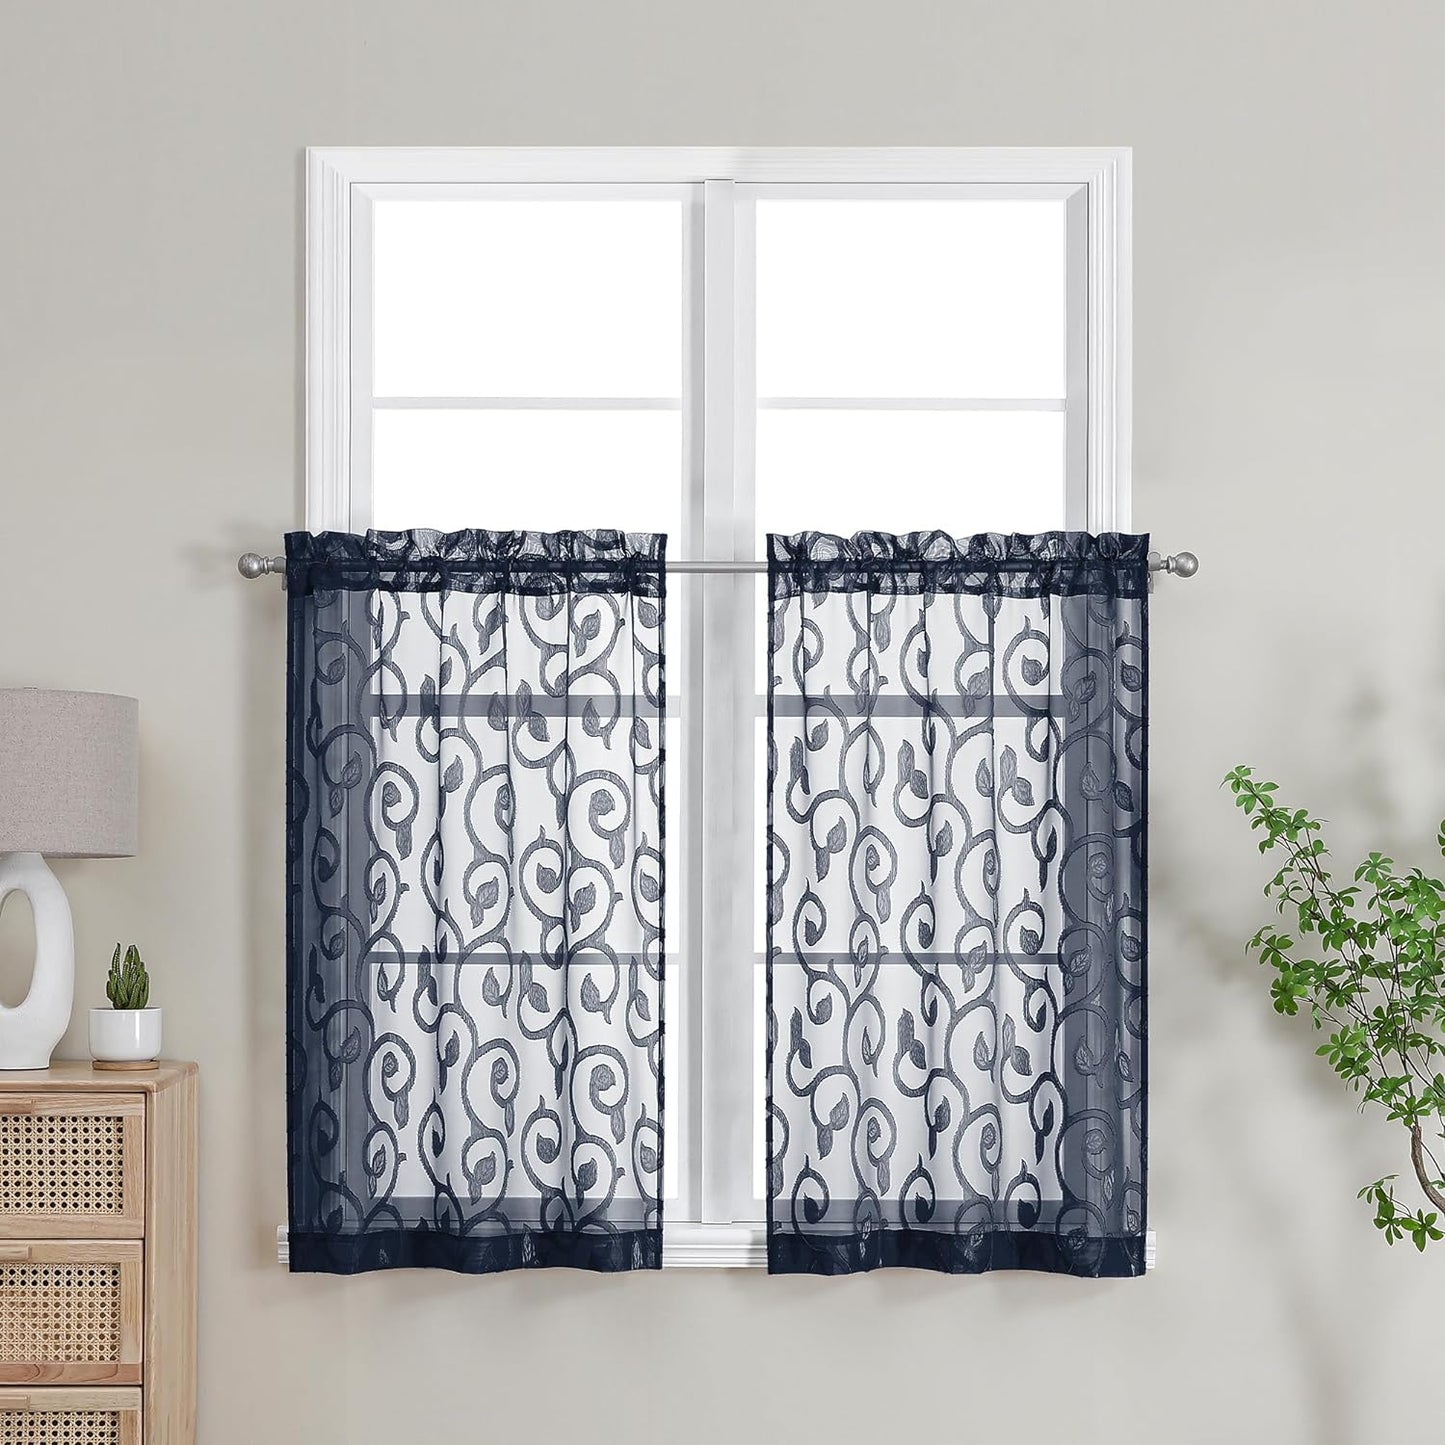 OWENIE Furman Sheer Curtains 84 Inches Long for Bedroom Living Room 2 Panels Set, Light Filtering Window Curtains, Semi Transparent Voile Top Dual Rod Pocket, Grey, 40Wx84L Inch, Total 84 Inches Width  OWENIE Navy Blue 26W X 36L 